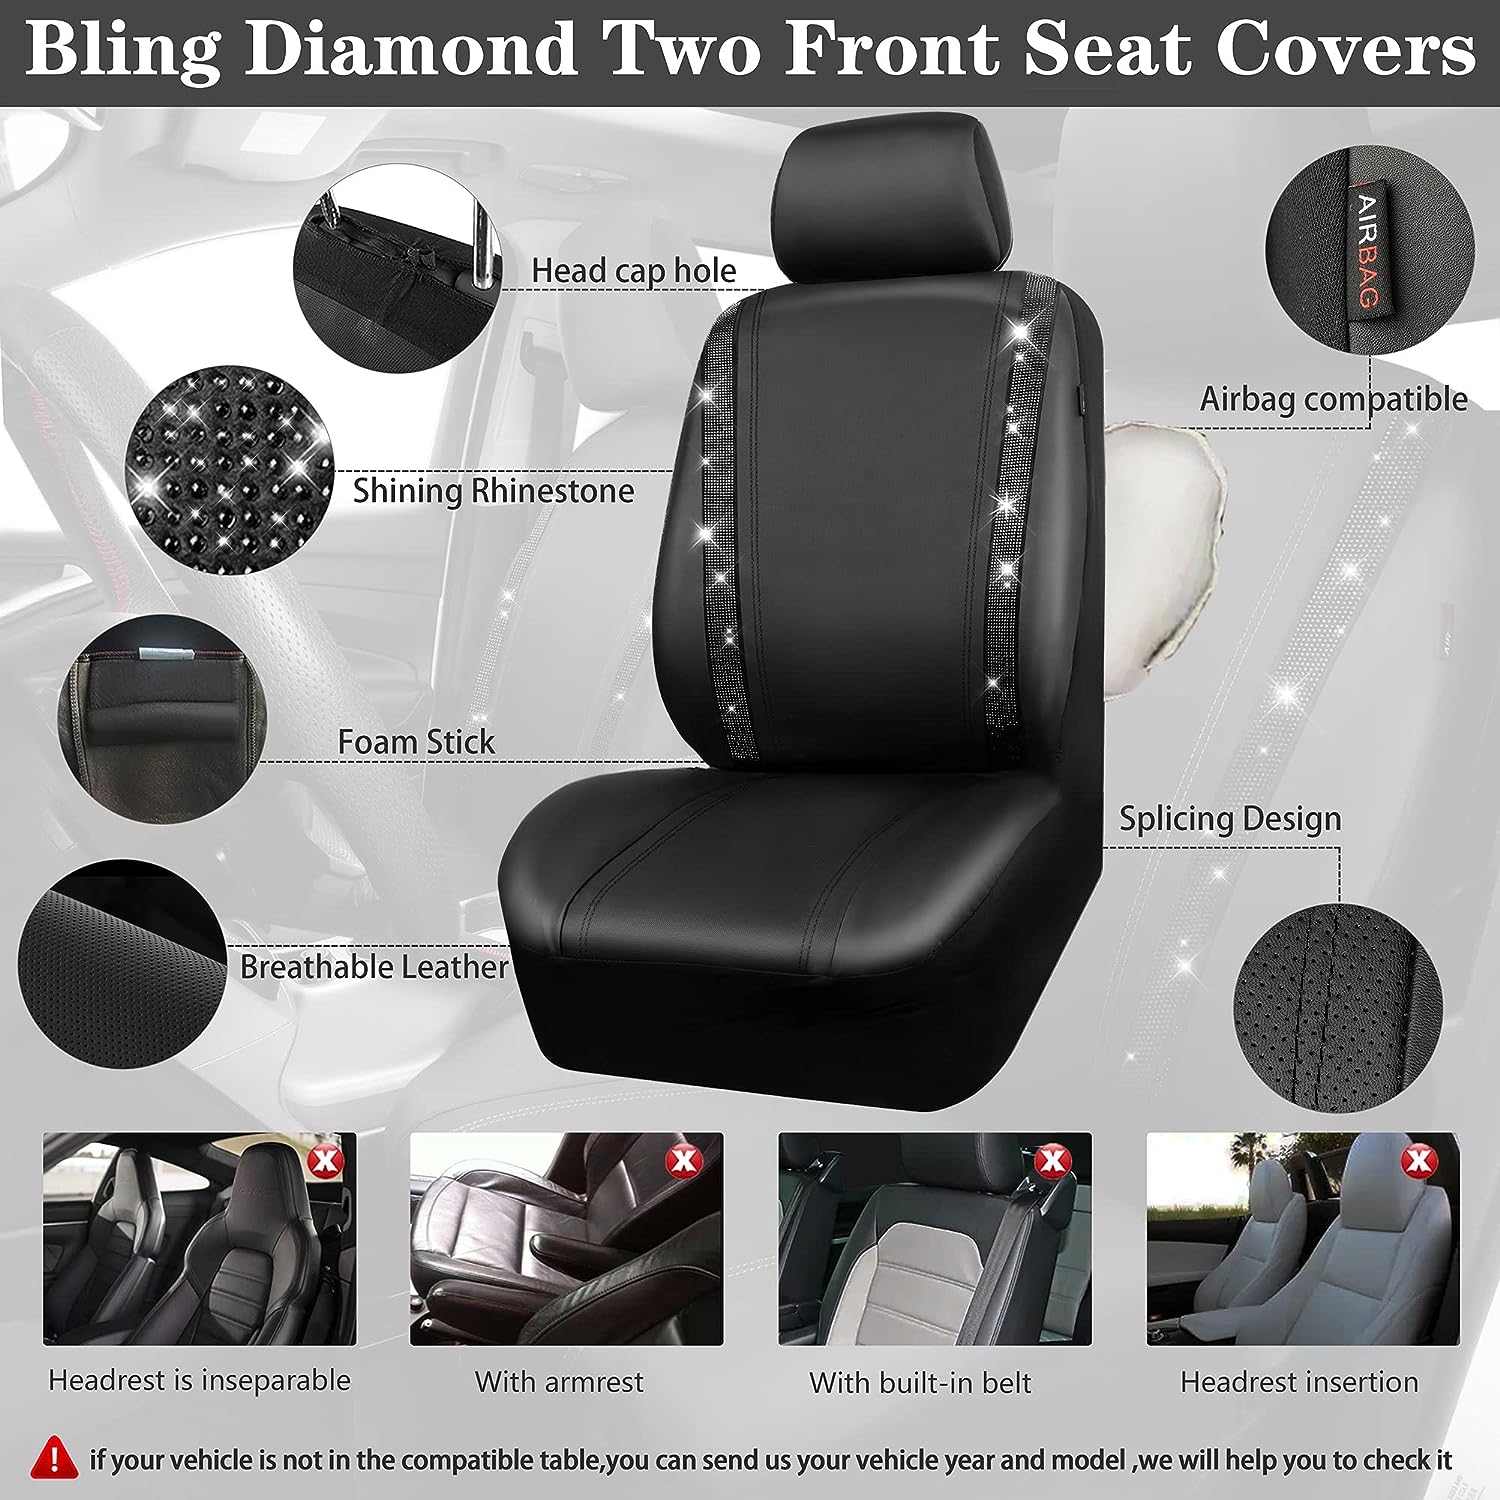 CAR PASS Leather Diamond Bling Car Seat Cover 2 Front Interior Sets, Waterproof Universal Shining Glitter Crystal Sparkle Fit for 95% Automotive Truck SUV Cute Women Girl, Black Silver Rhinestone